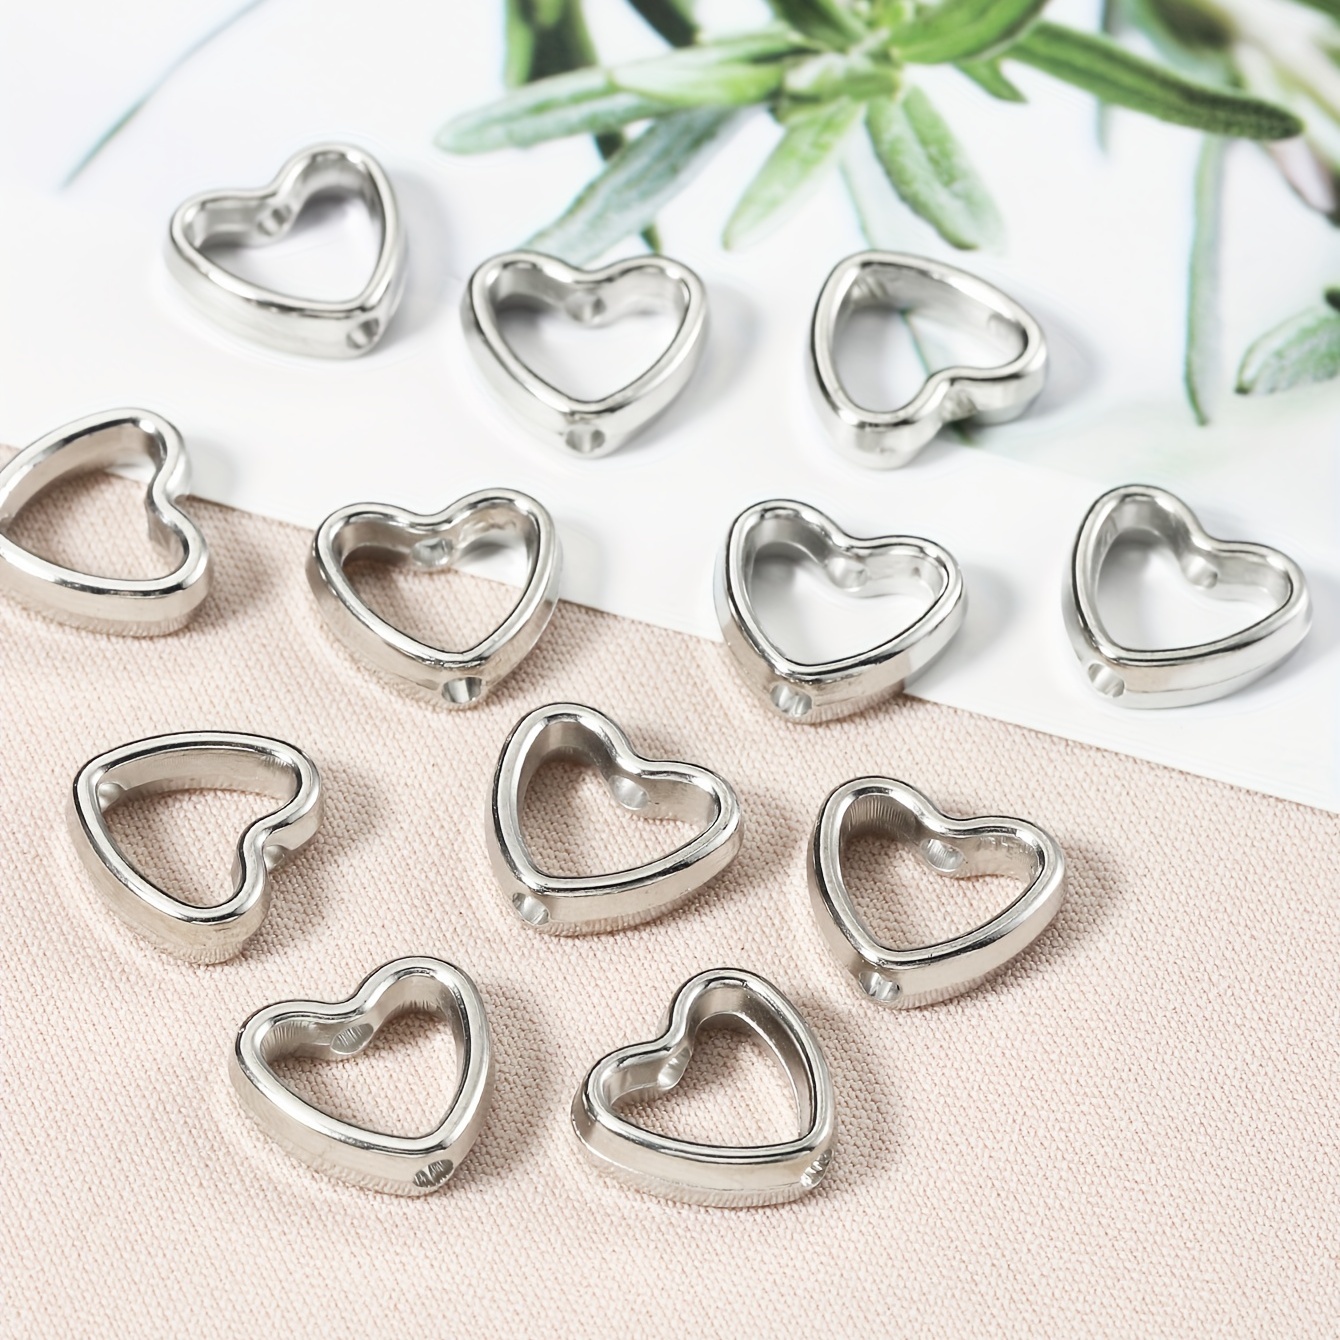 300 Pieces Heart Beads Heart Spacer Beads Small Hole Metal Loose Beads  Heart Shaped DIY Beads for Making Bracelet Necklace Earring Accessories